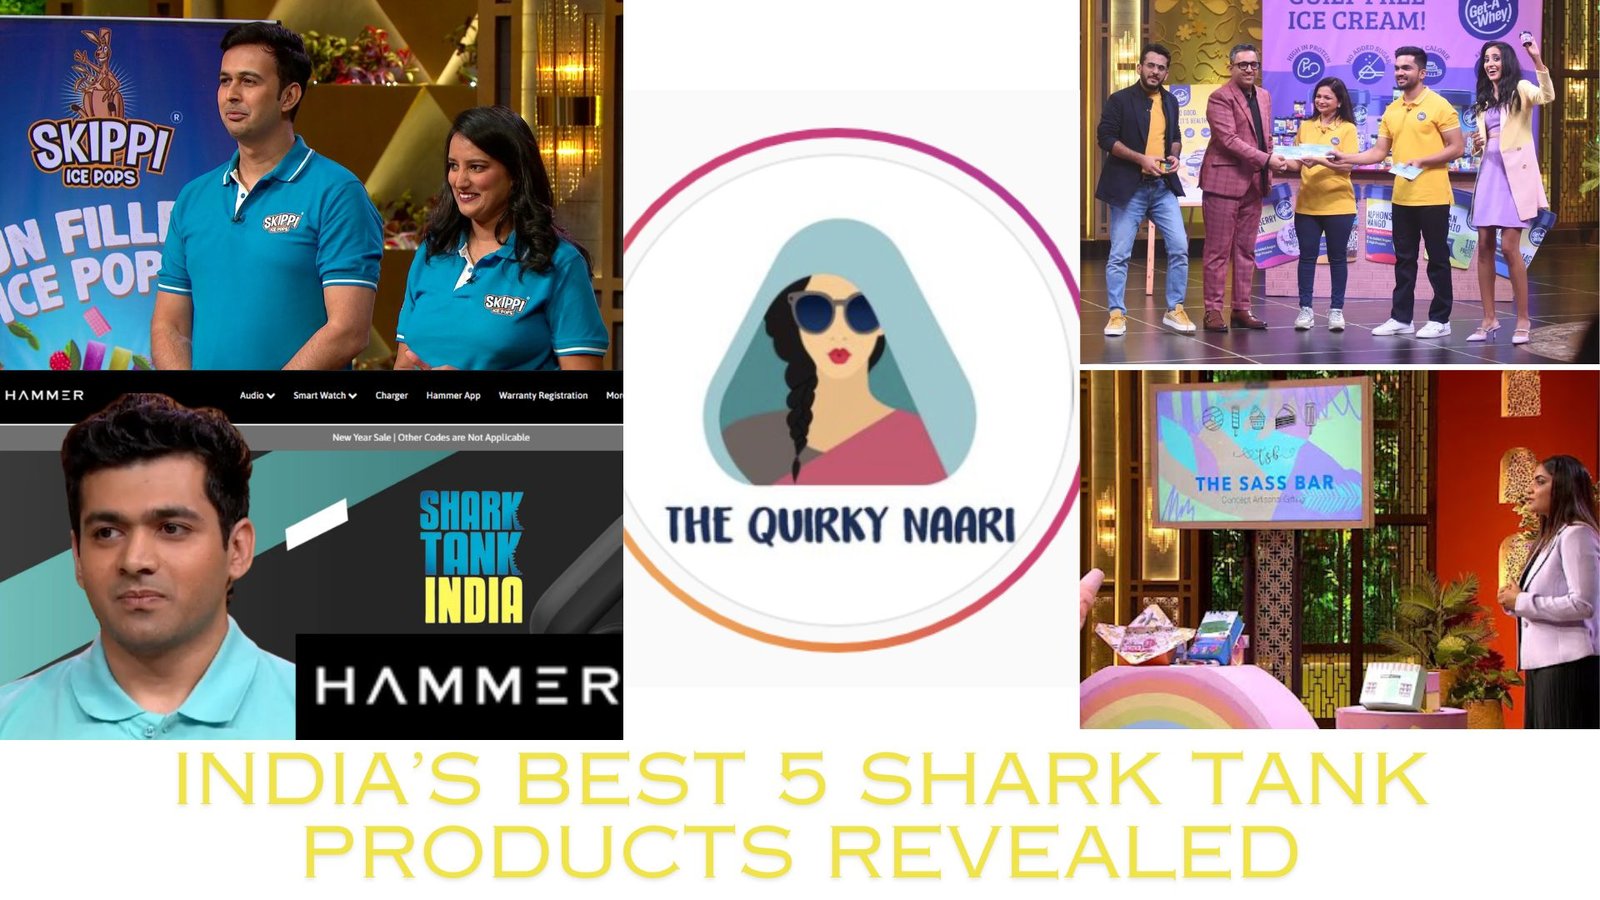 India’s Best 5 Shark Tank Products Revealed